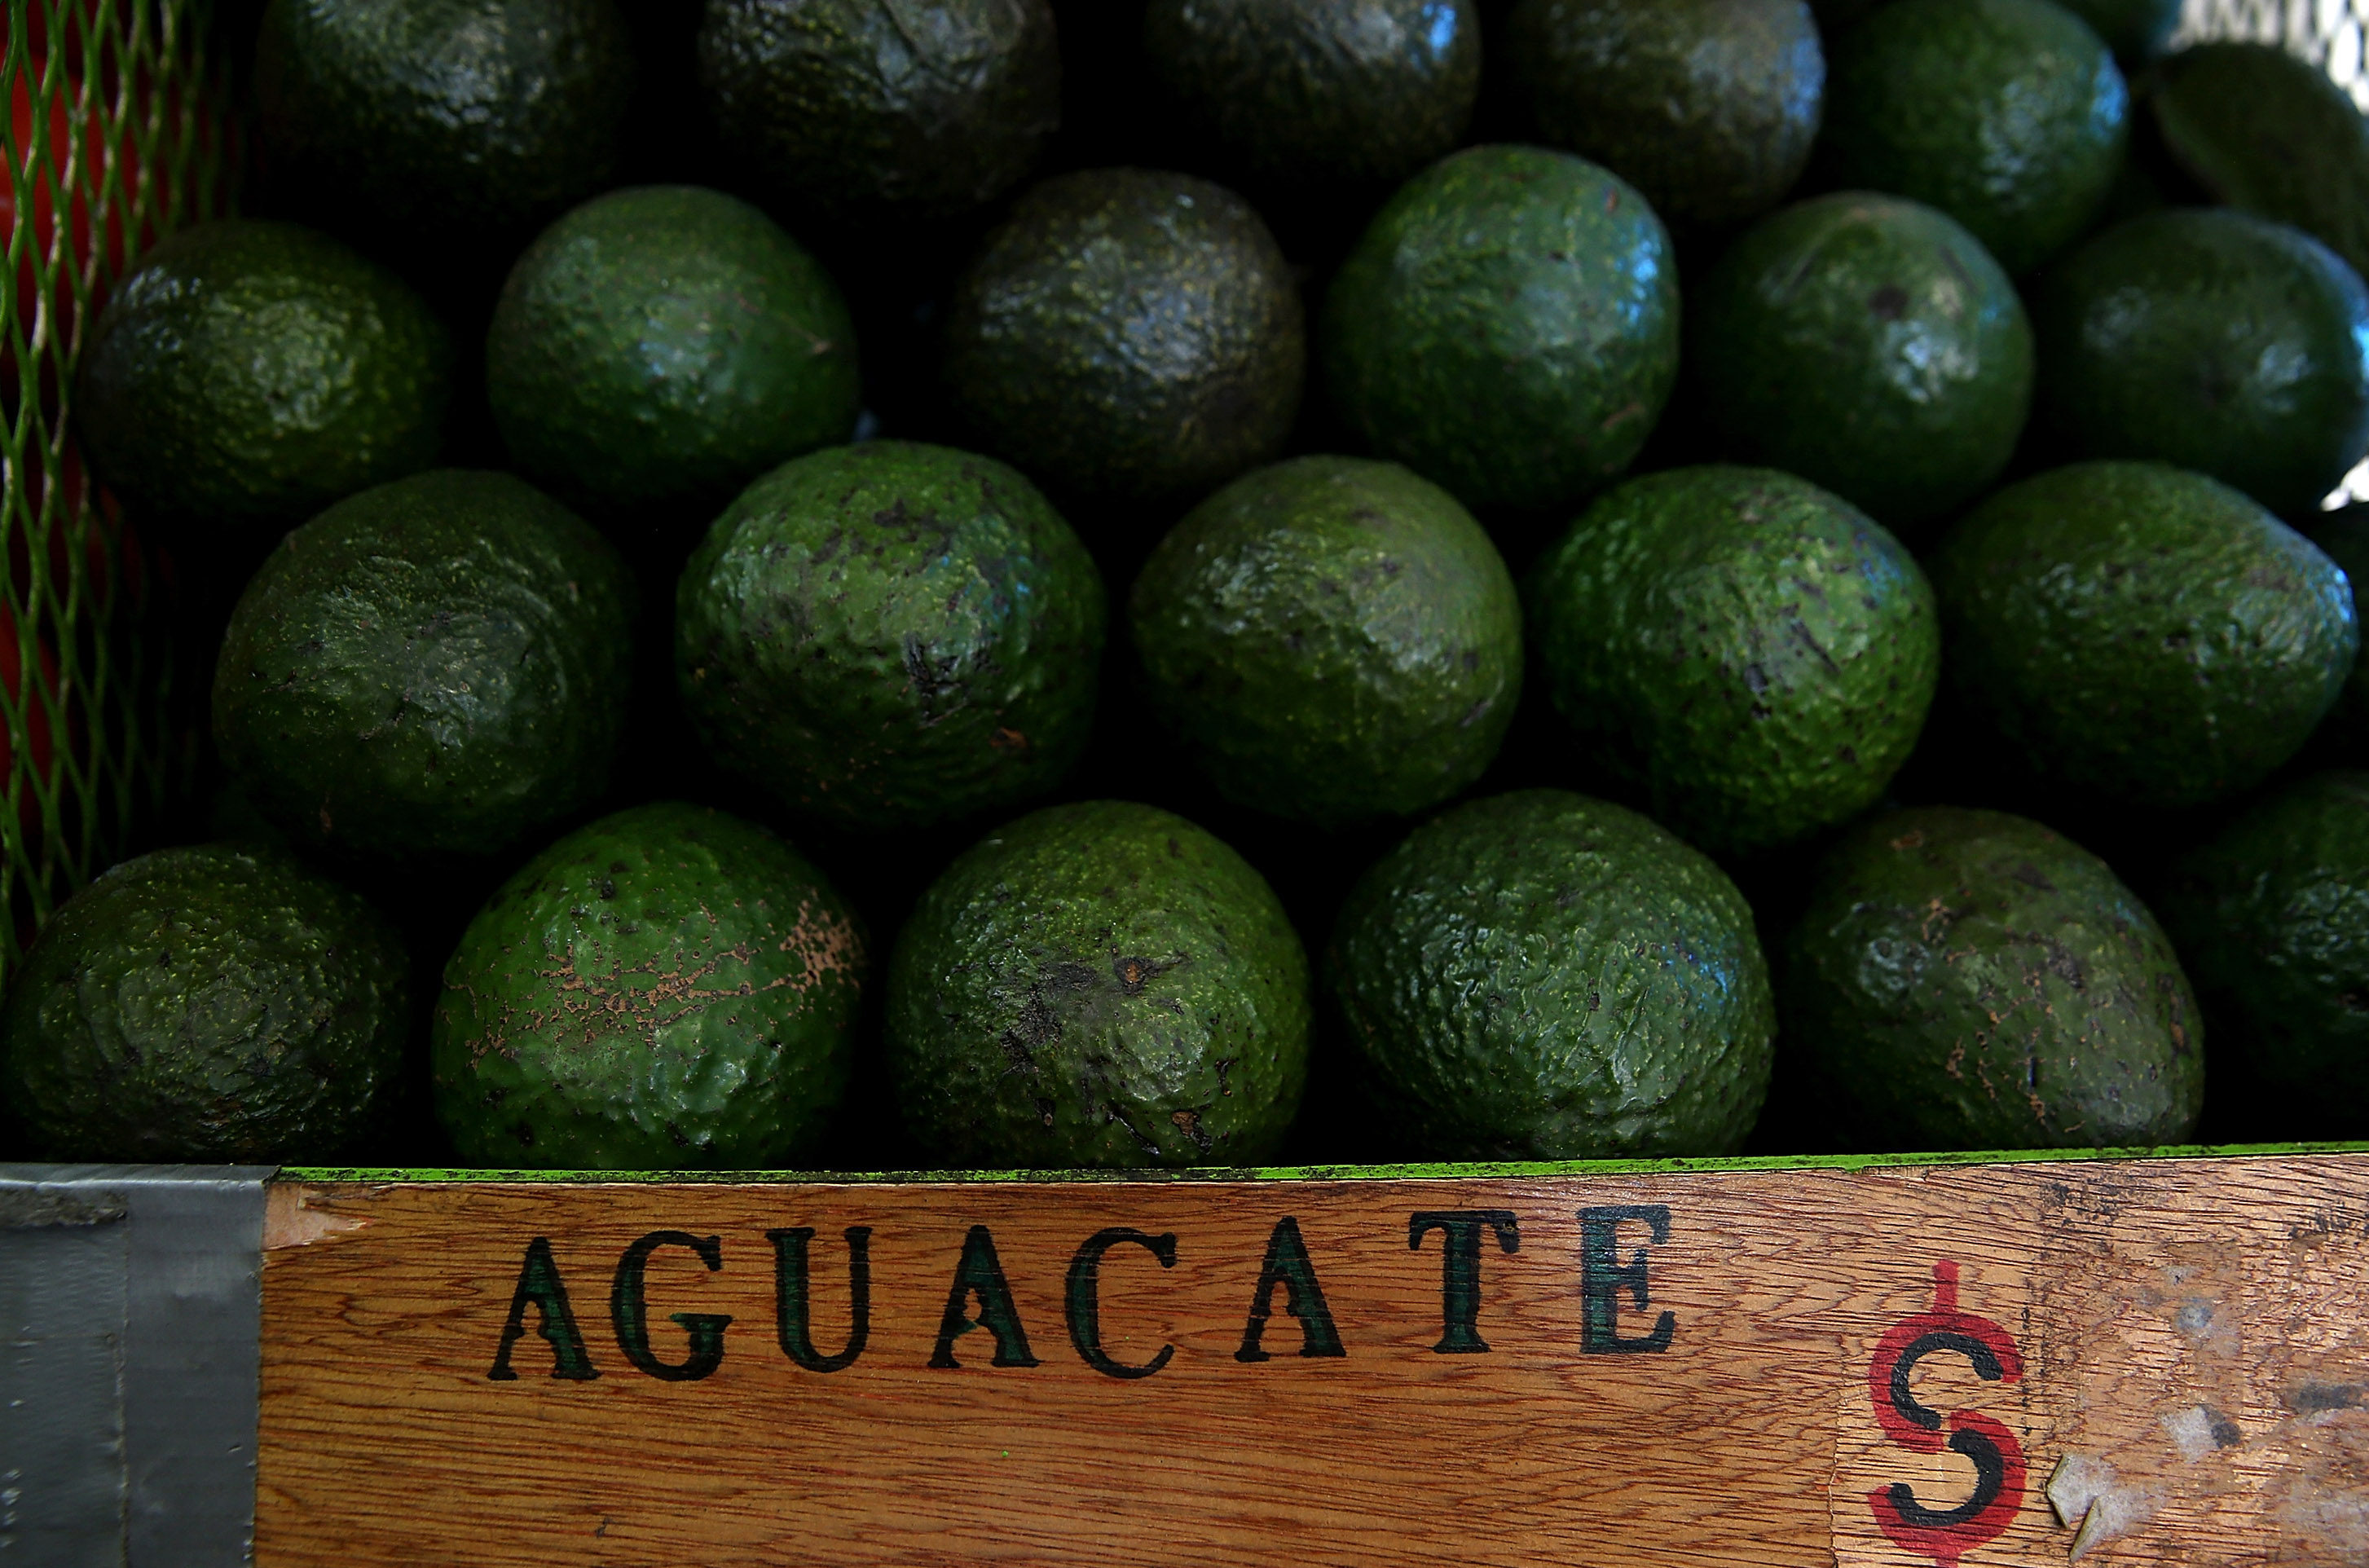 Avocados are displayed in a store in Tijuana, Mexico. Photo: Justin Sullivan/Getty Images